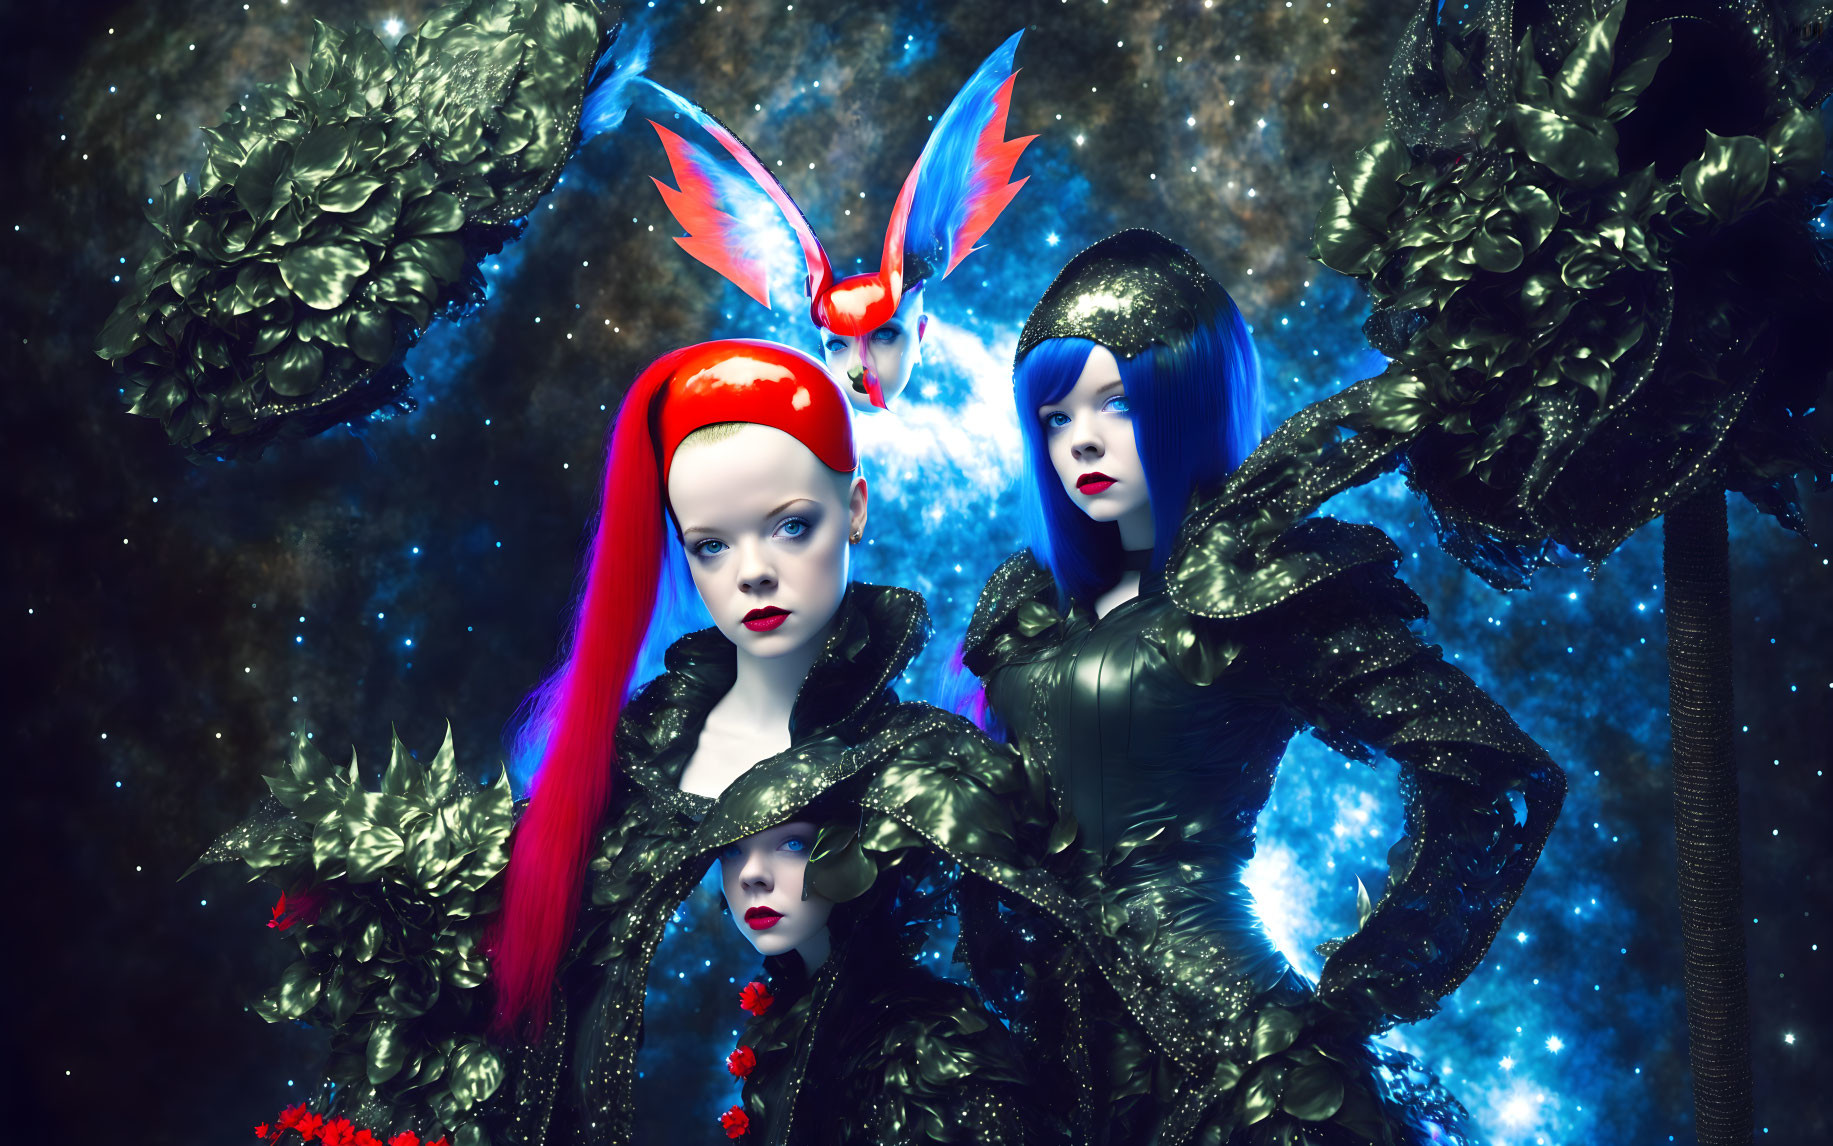 Futuristic women in vivid makeup and costumes with mythical bird on cosmic background